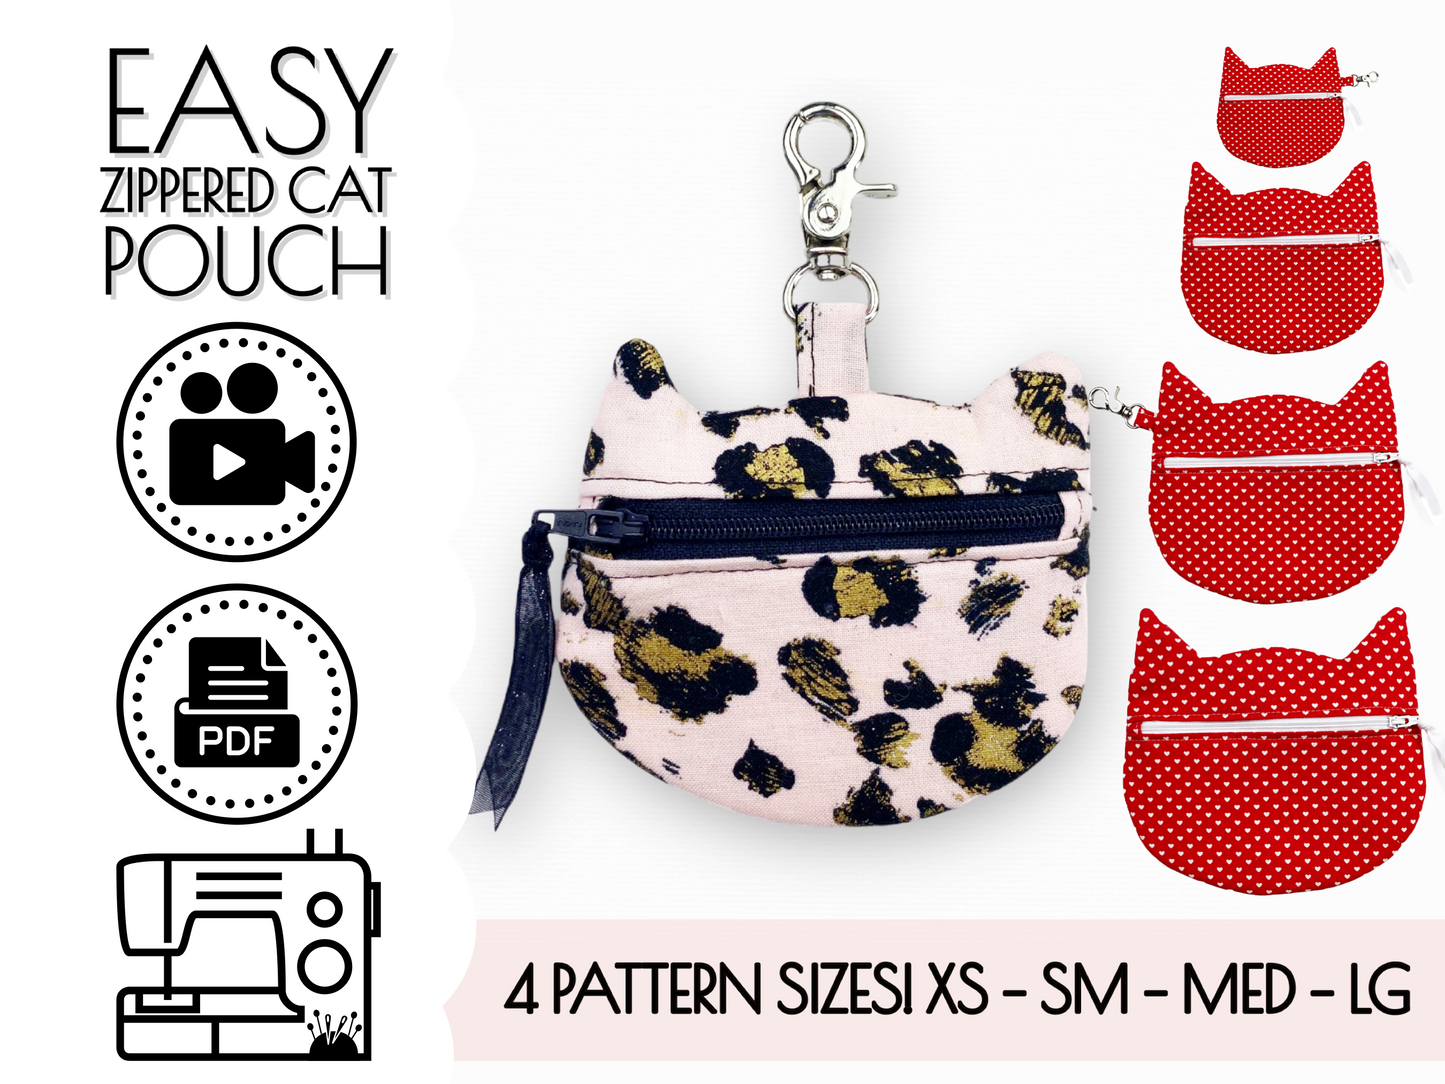 Zippered Cat Clutch Pouch in 4 Sizes